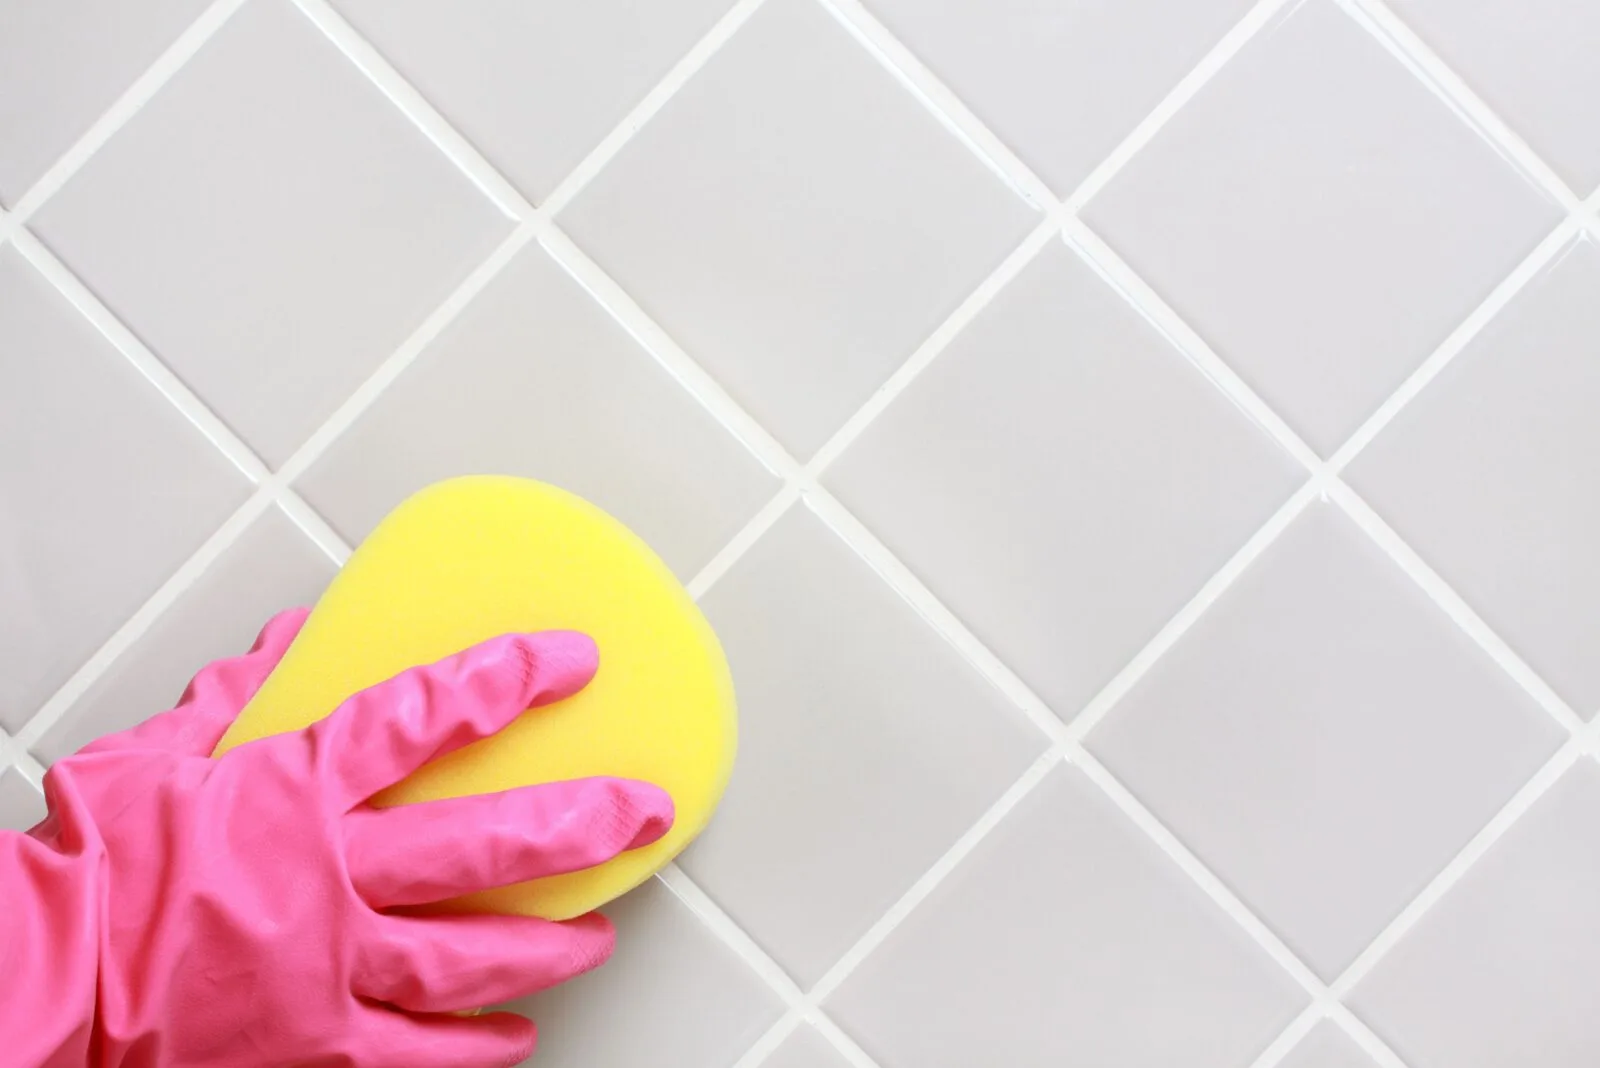 cleaning tile with a sponge